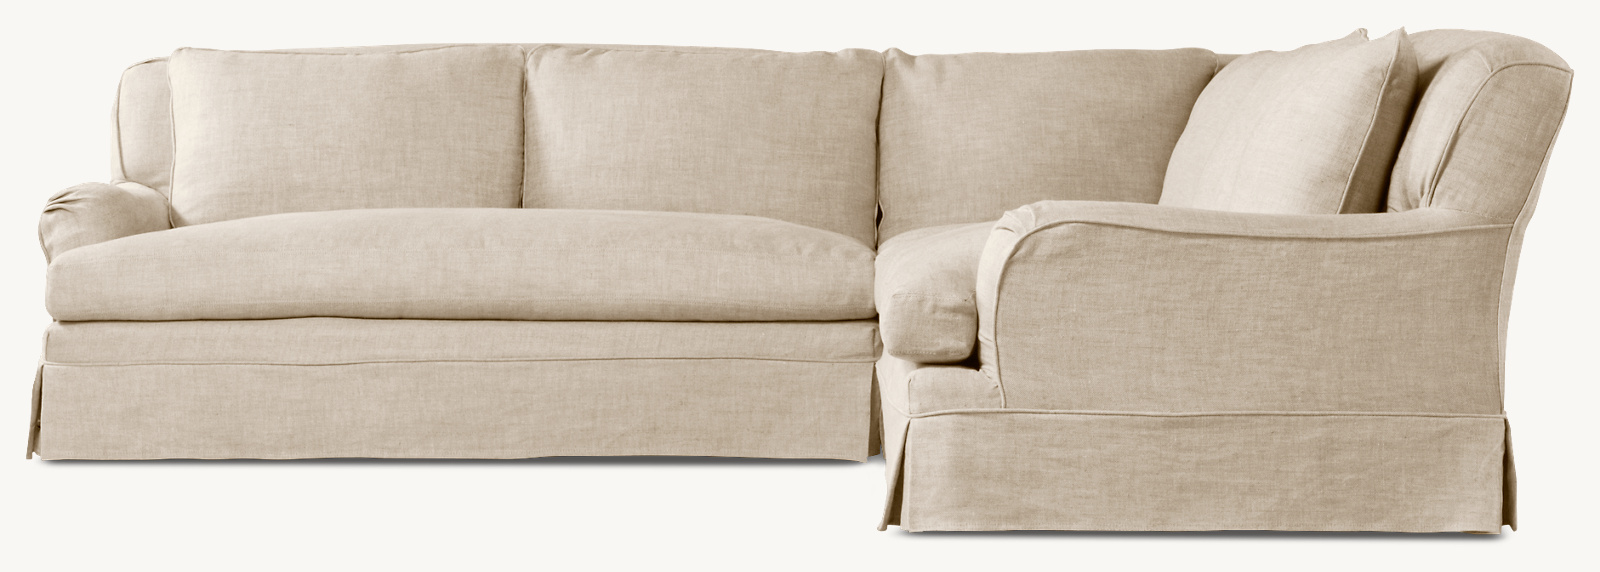 Shown in Sand Belgian Linen; sectional consists of 1 left-arm sofa, 1 corner chair and 1 right-arm sofa. Cushion configuration may vary by component.